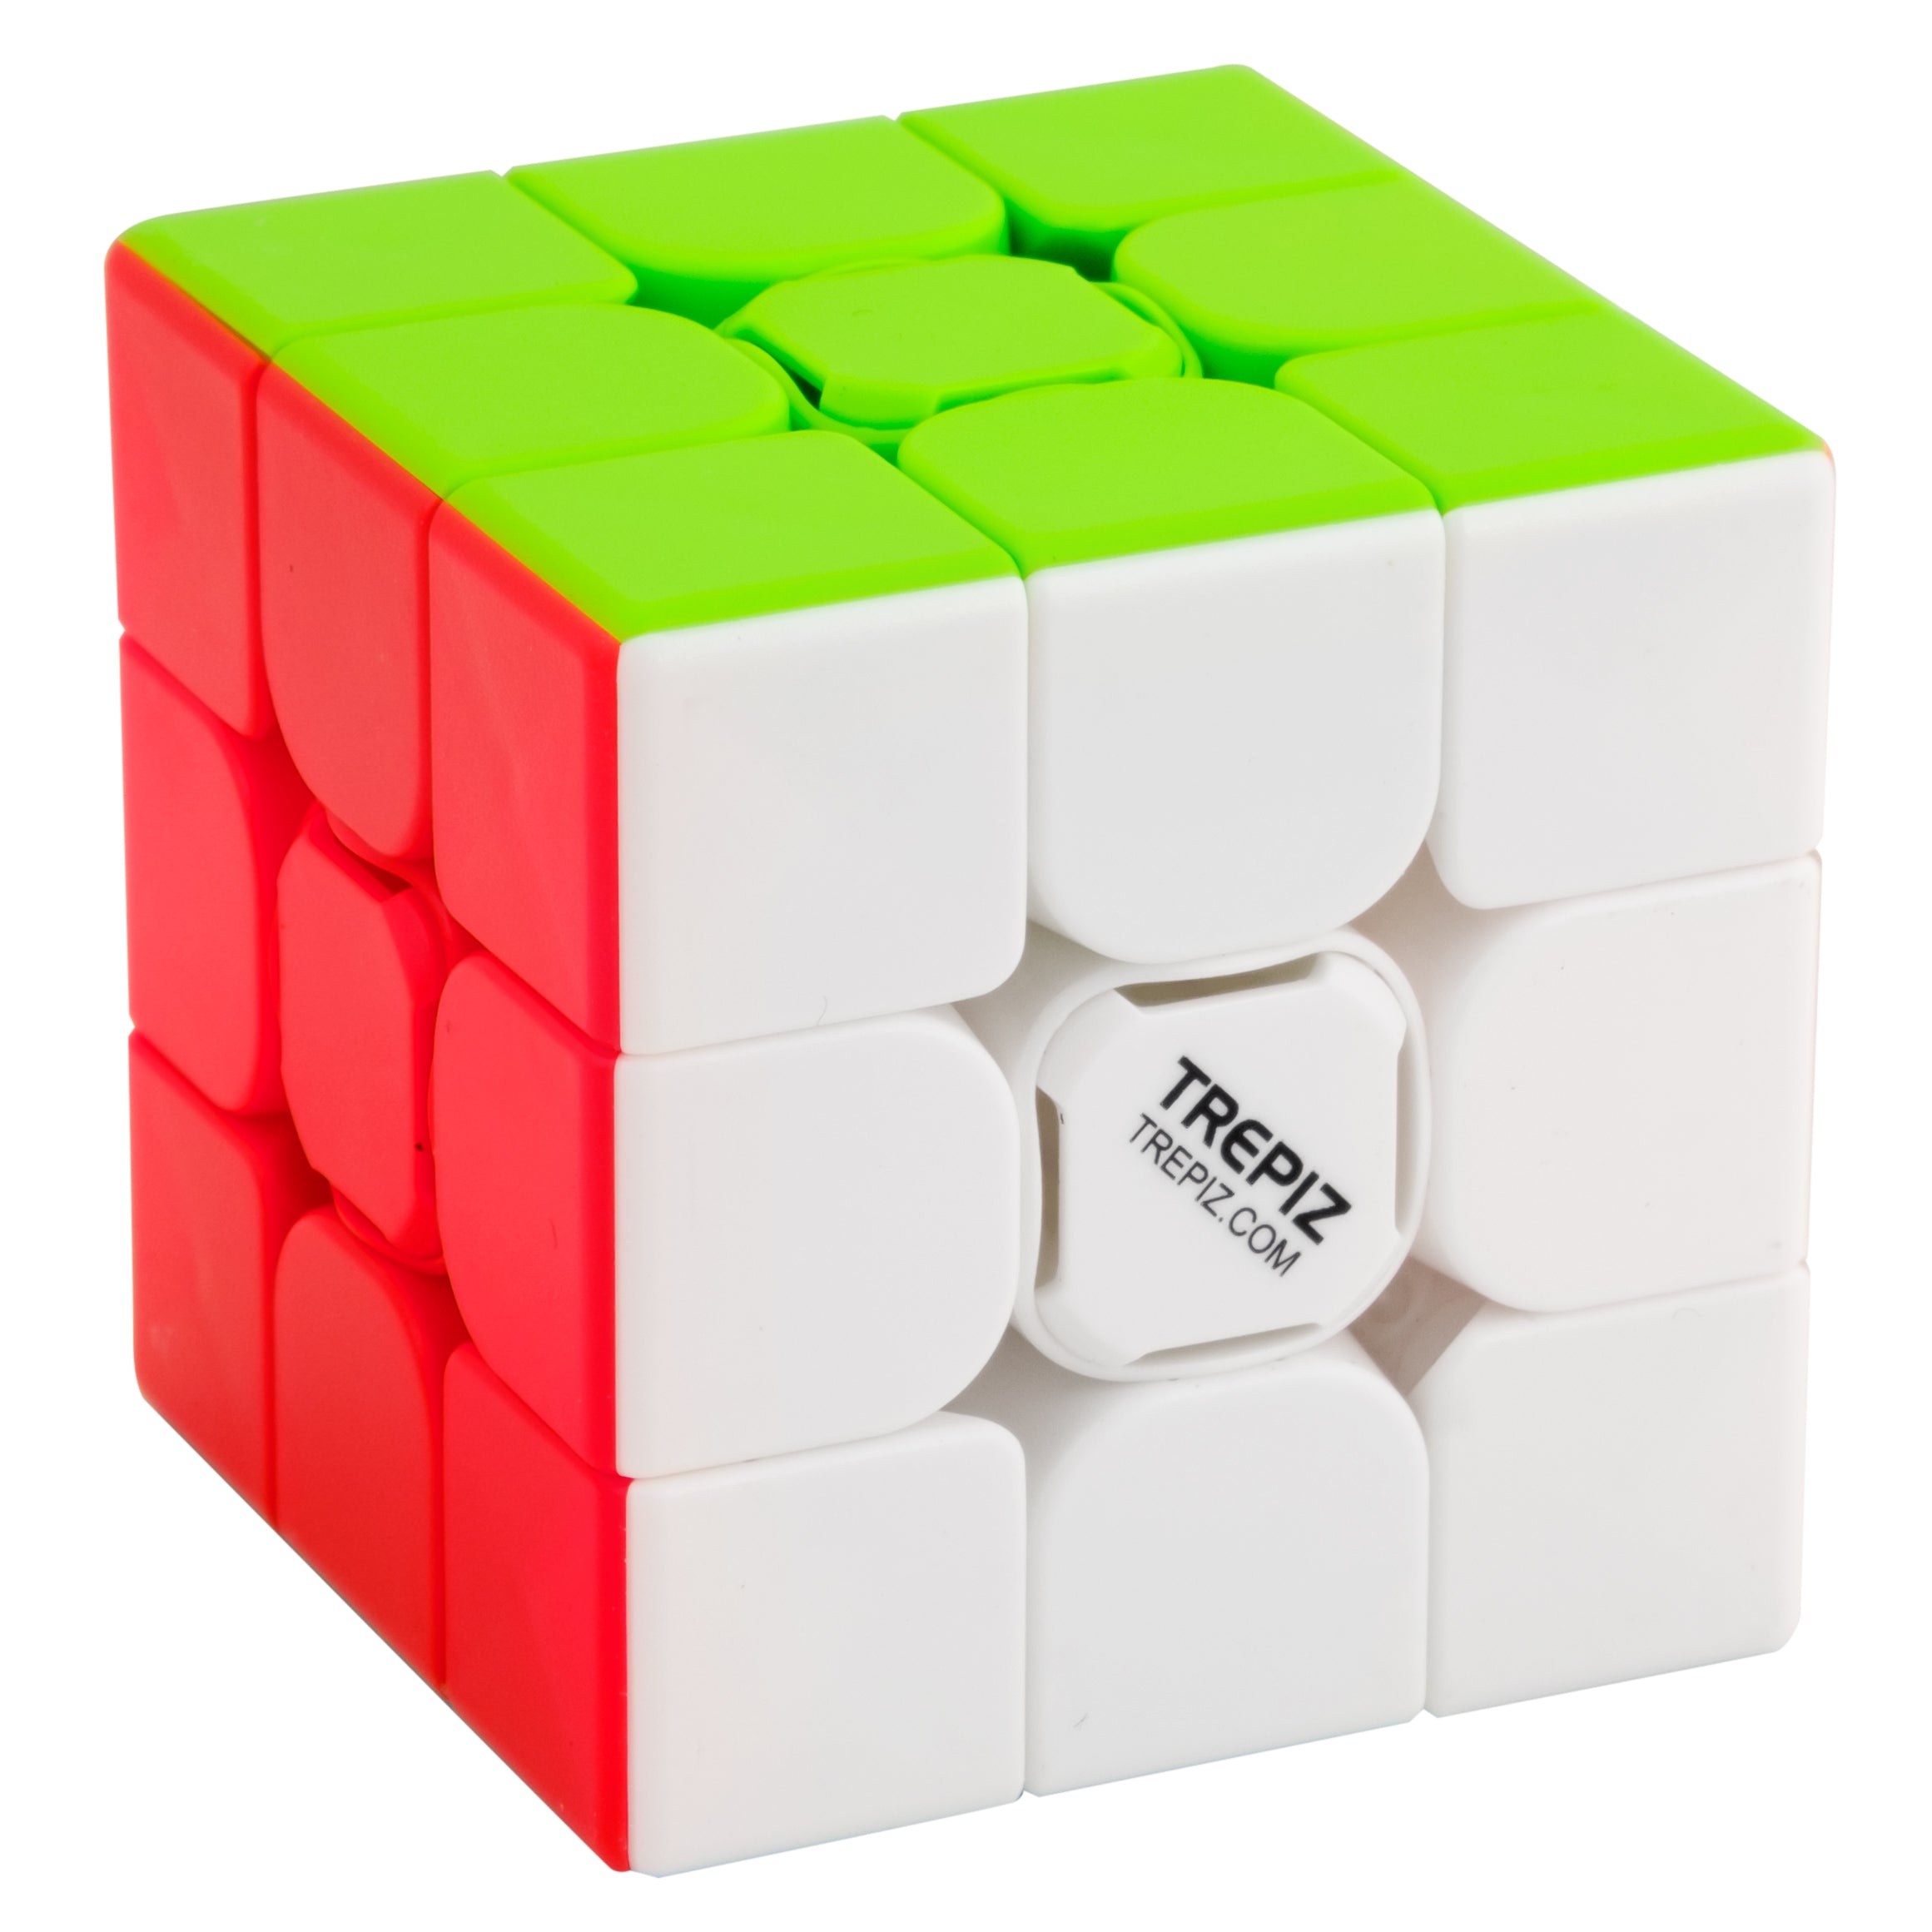 Trepiz Speed Cube 3x3 - Buttery Smooth, Ultra Durable Magic Cube